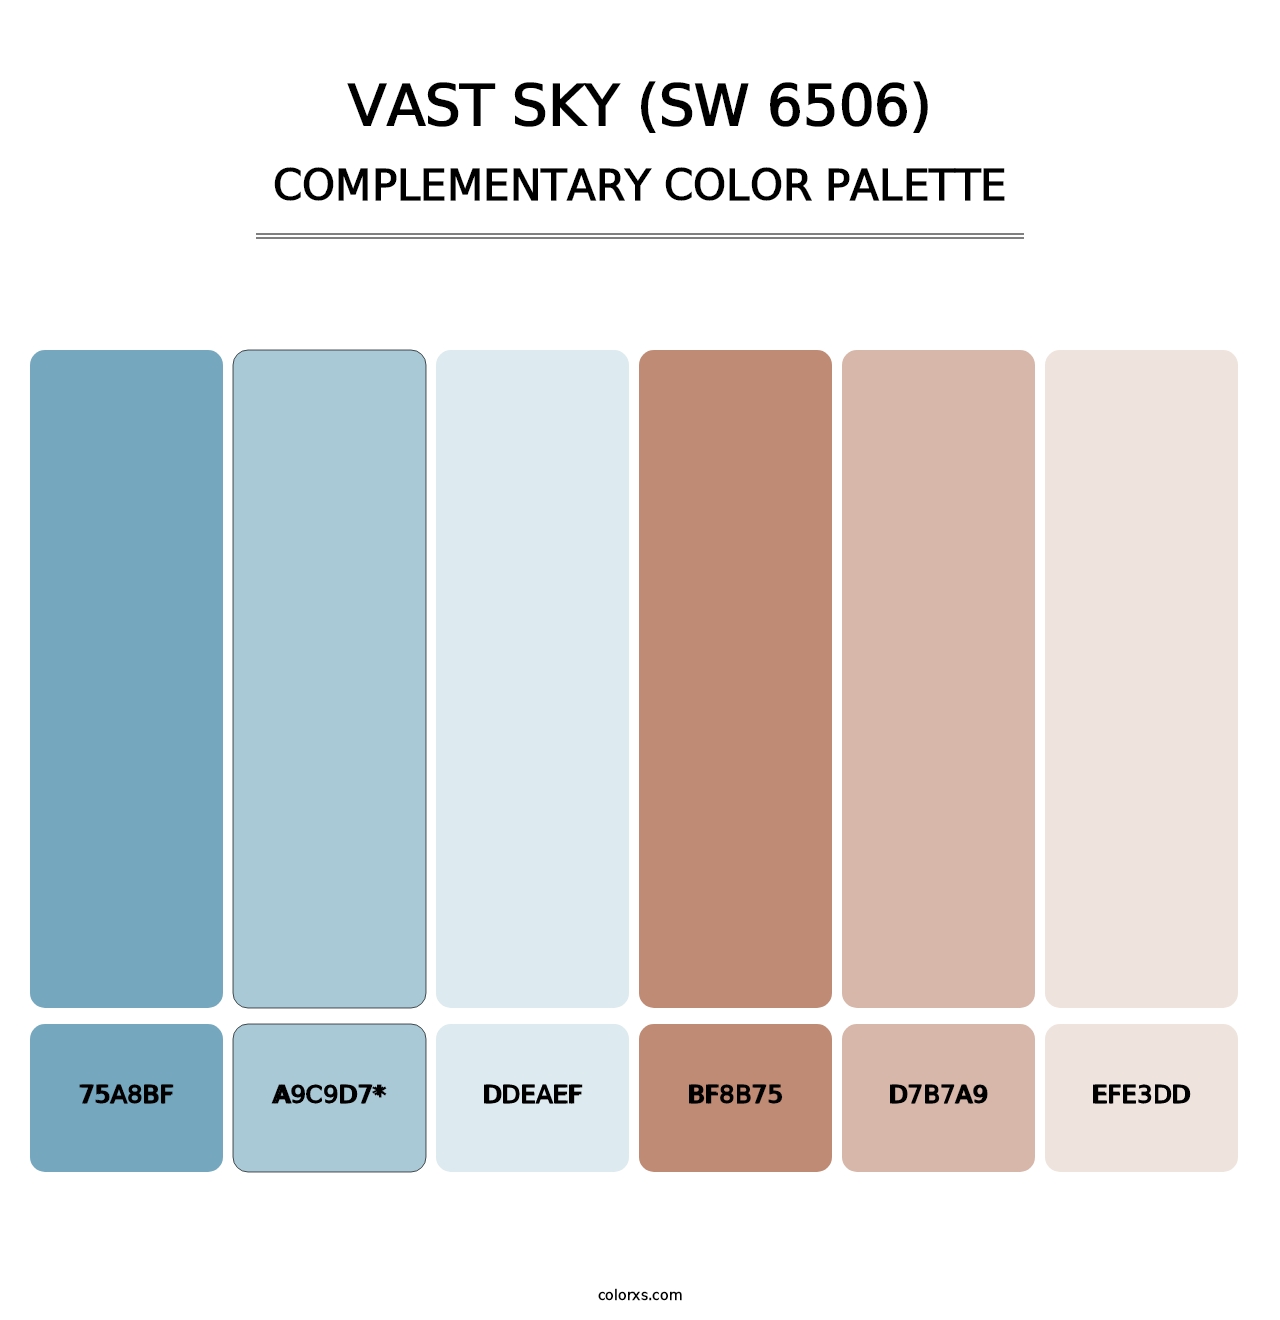 Vast Sky (SW 6506) - Complementary Color Palette